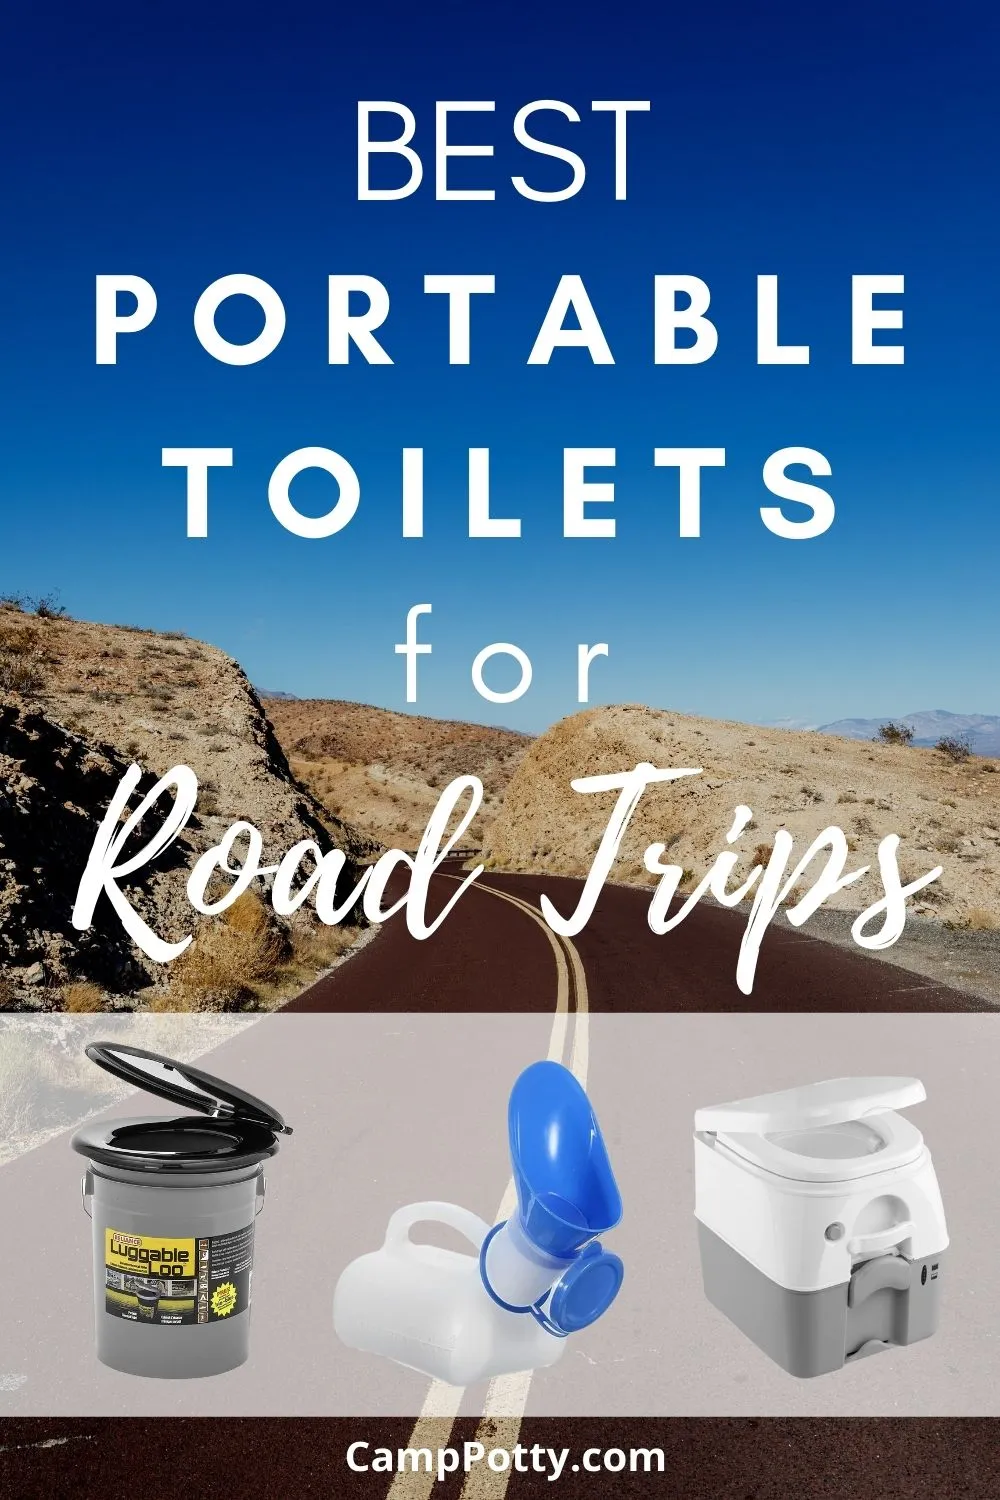 An in-depth breakdown of the 3 Best Portable Toilets For Road Trips and car travel. Portable Flushable Toilet, Bucket toilet, and Urination Device comparison: How-To-Use and Ease of use, Waste Disposal, and user experience.